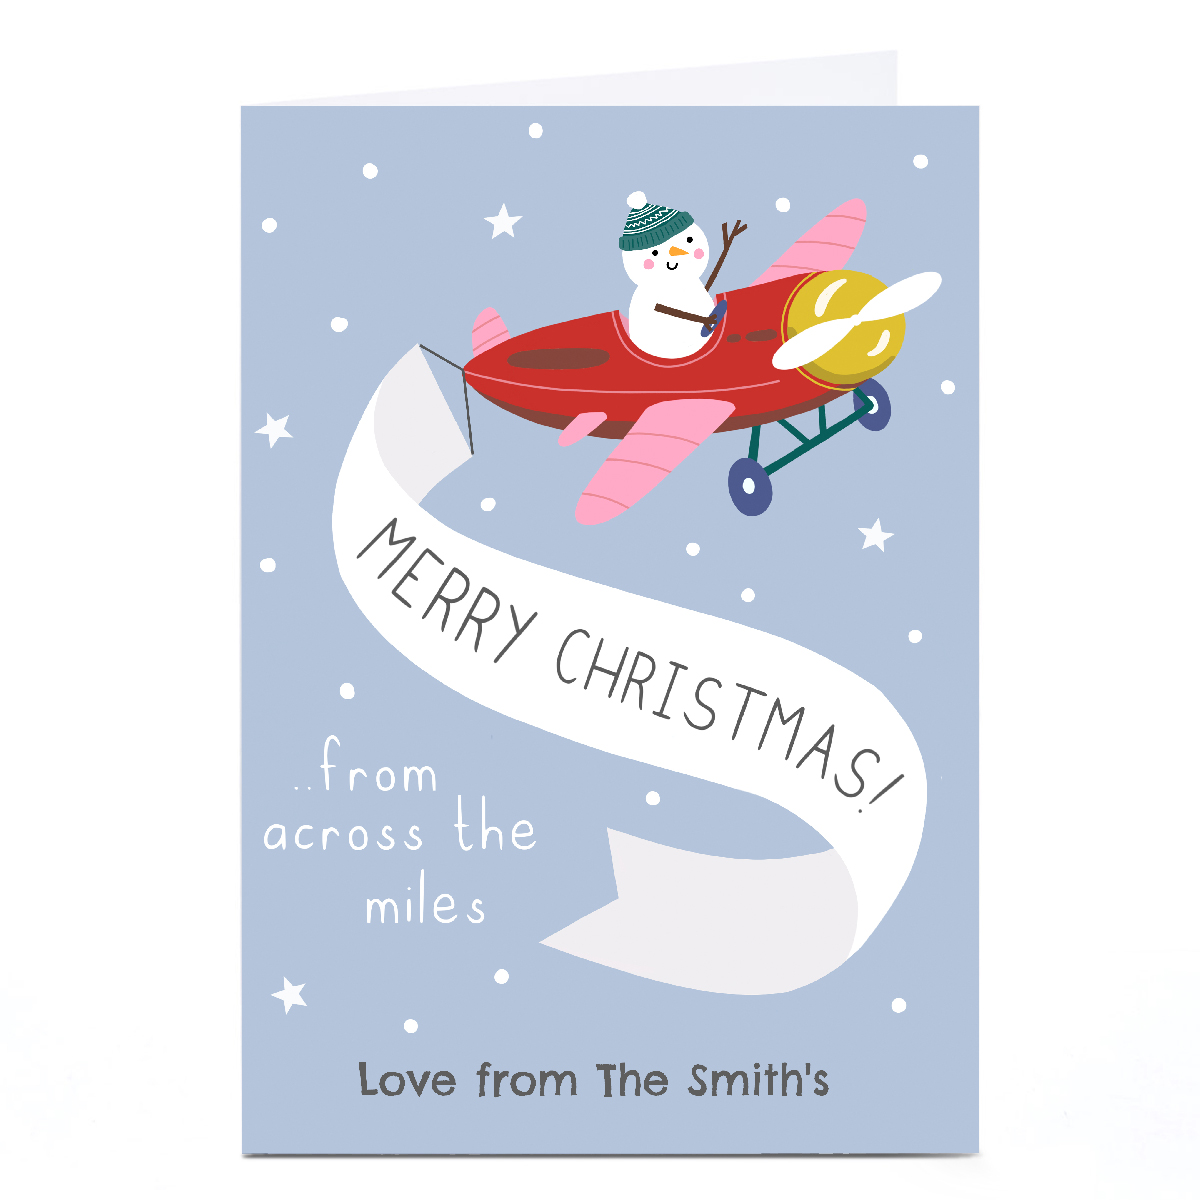 Personalised Zoe Spry Christmas Card - Across the Miles